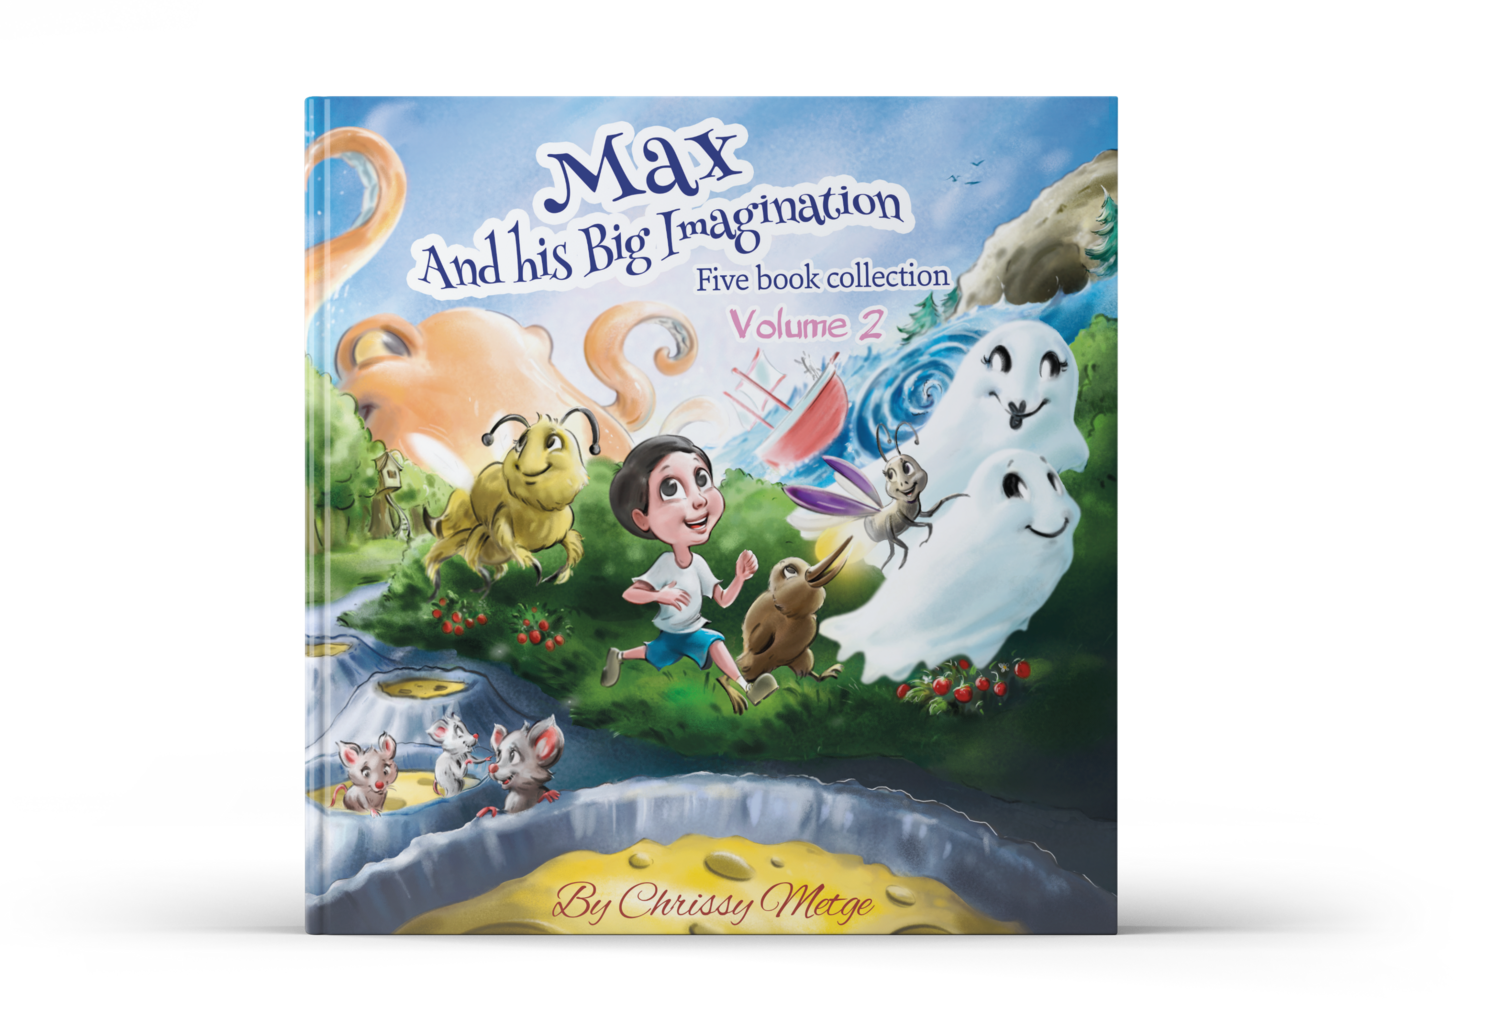 Max and his Big Imagination: Five book collection - Volume 2